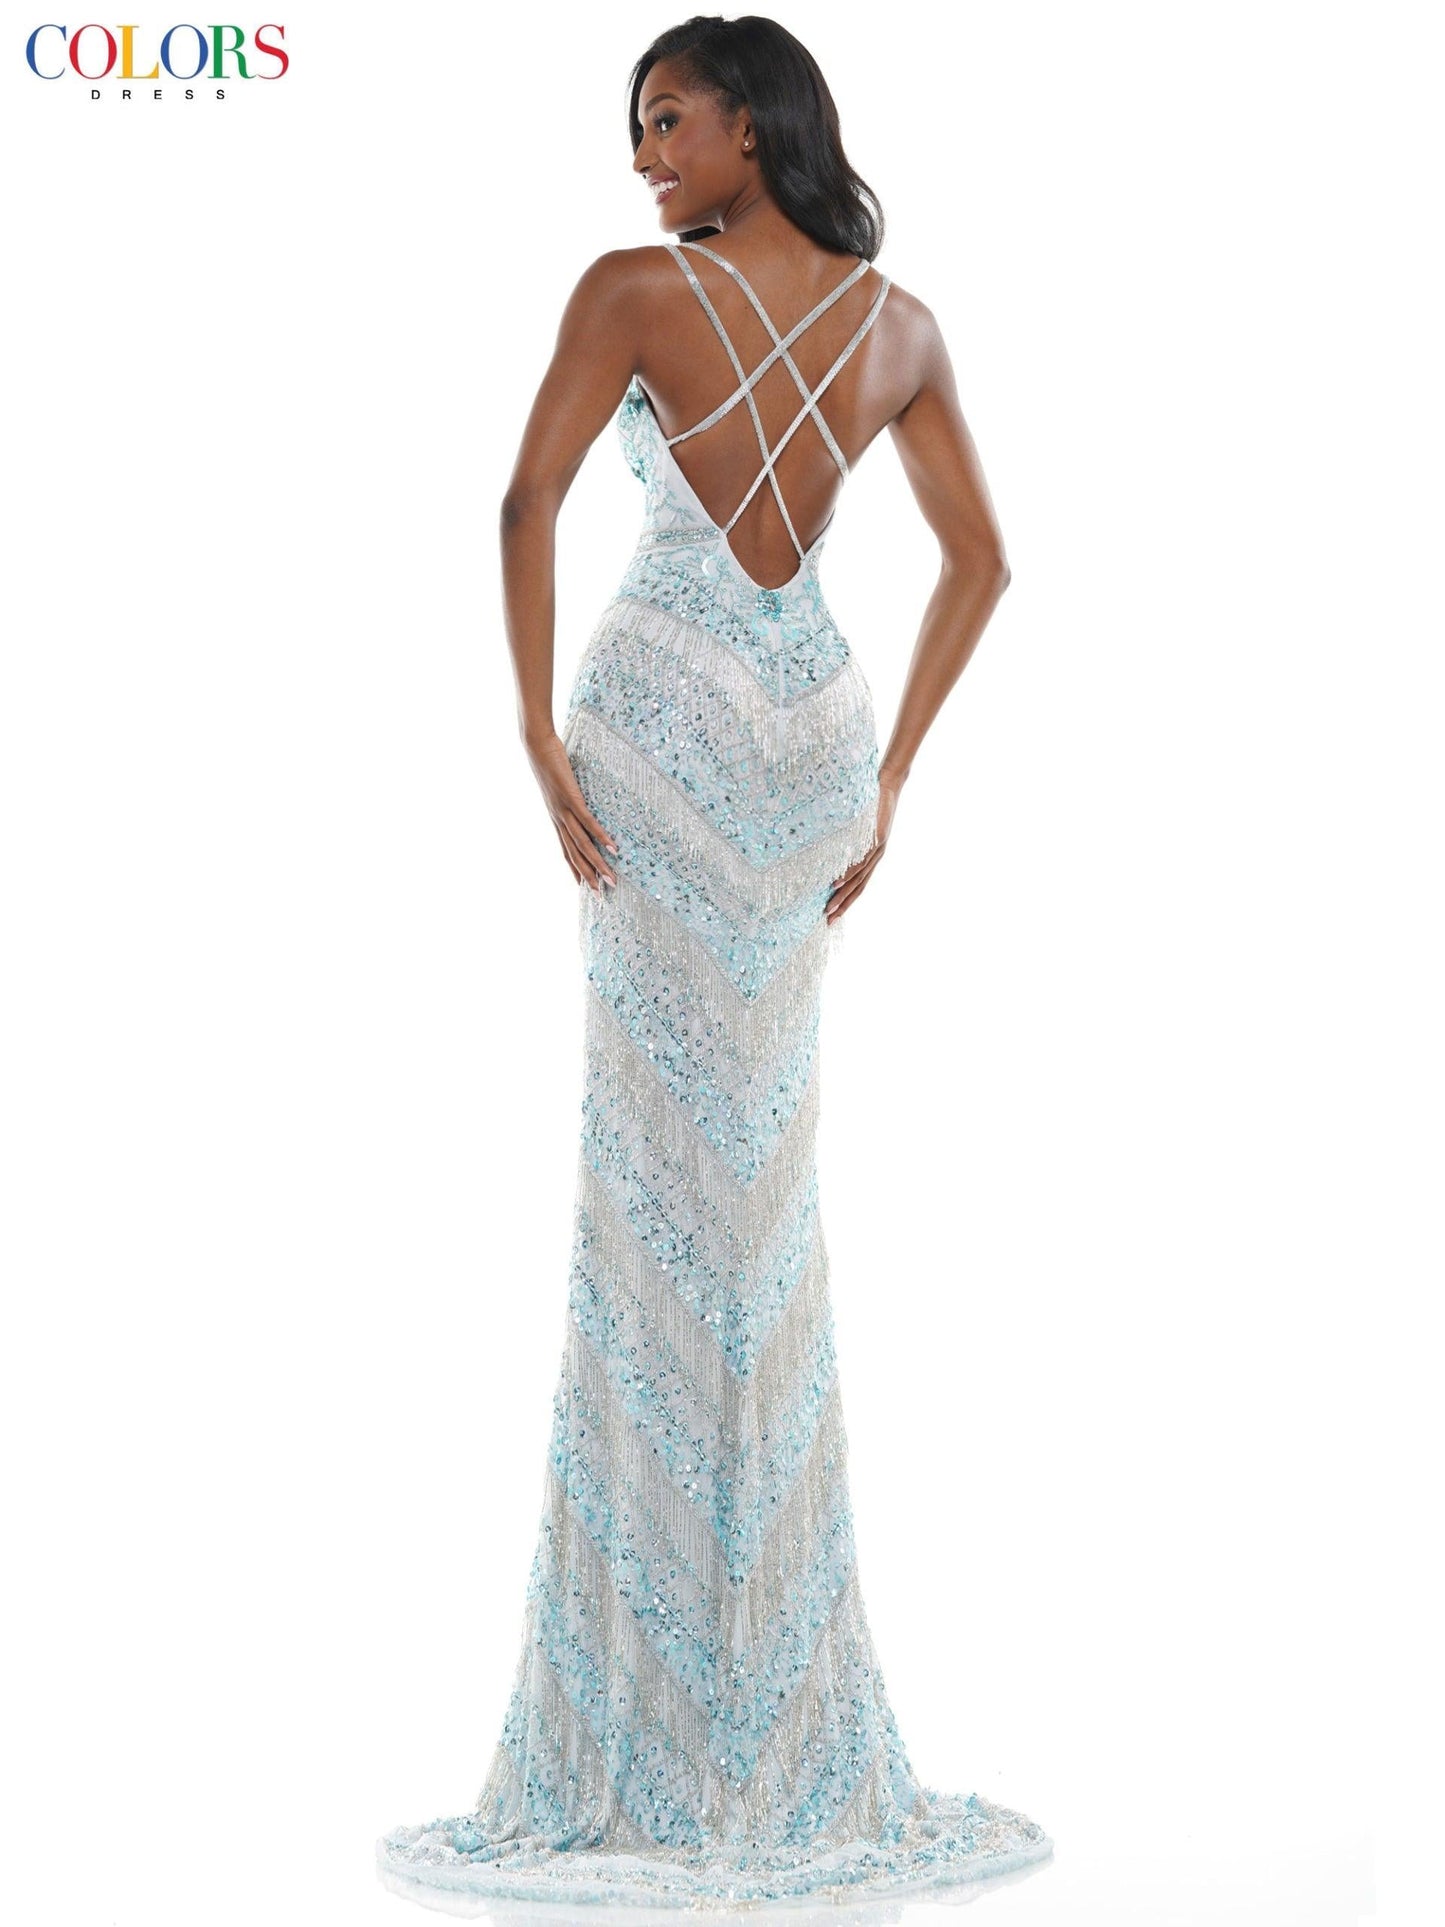 Colors Long Spaghetti Strap Beaded Prom Dress 109 - The Dress Outlet